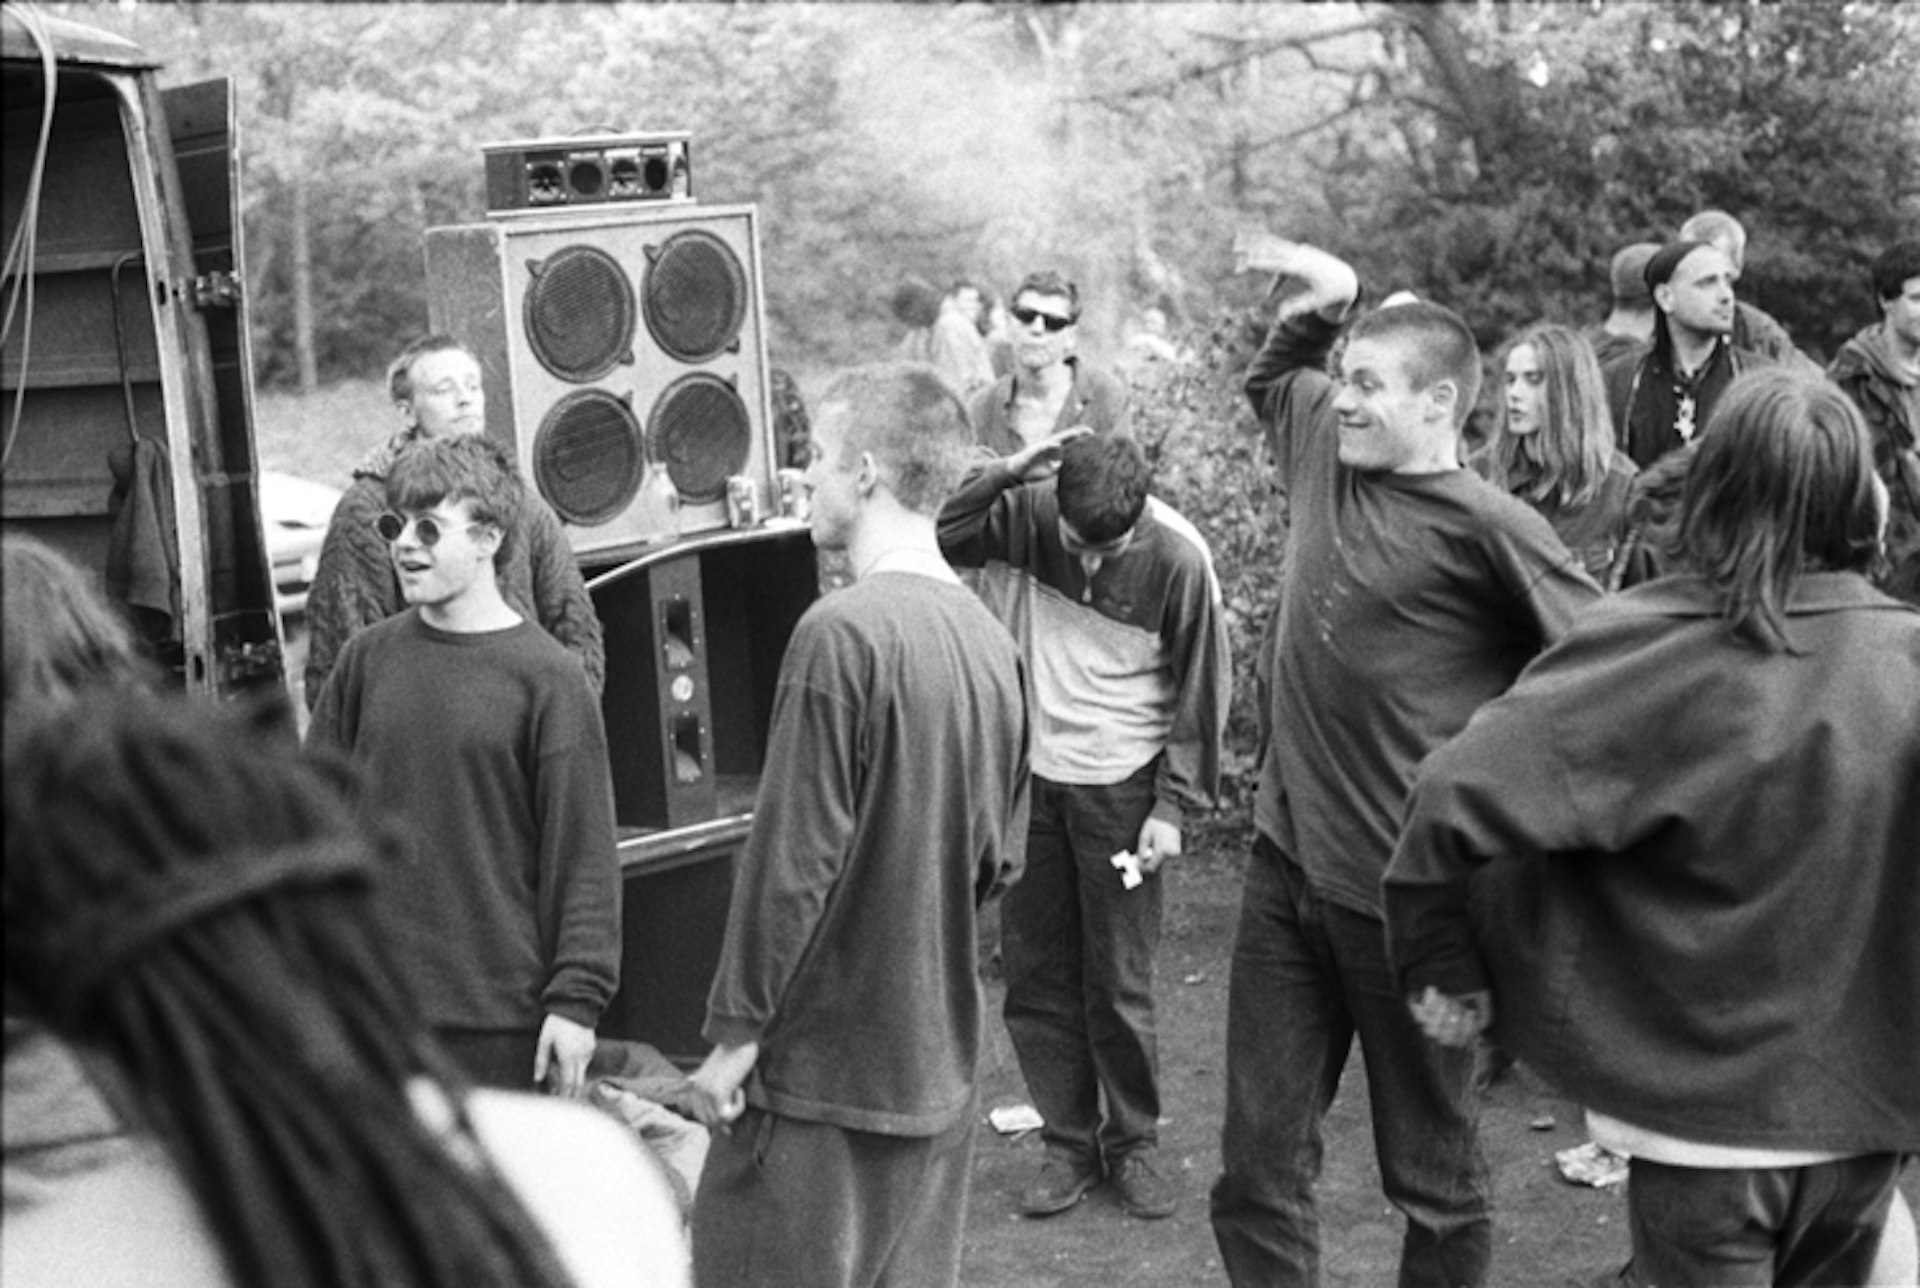 An afterparty in Wanstead Common, London, following the Anti-CJA march, 1994.